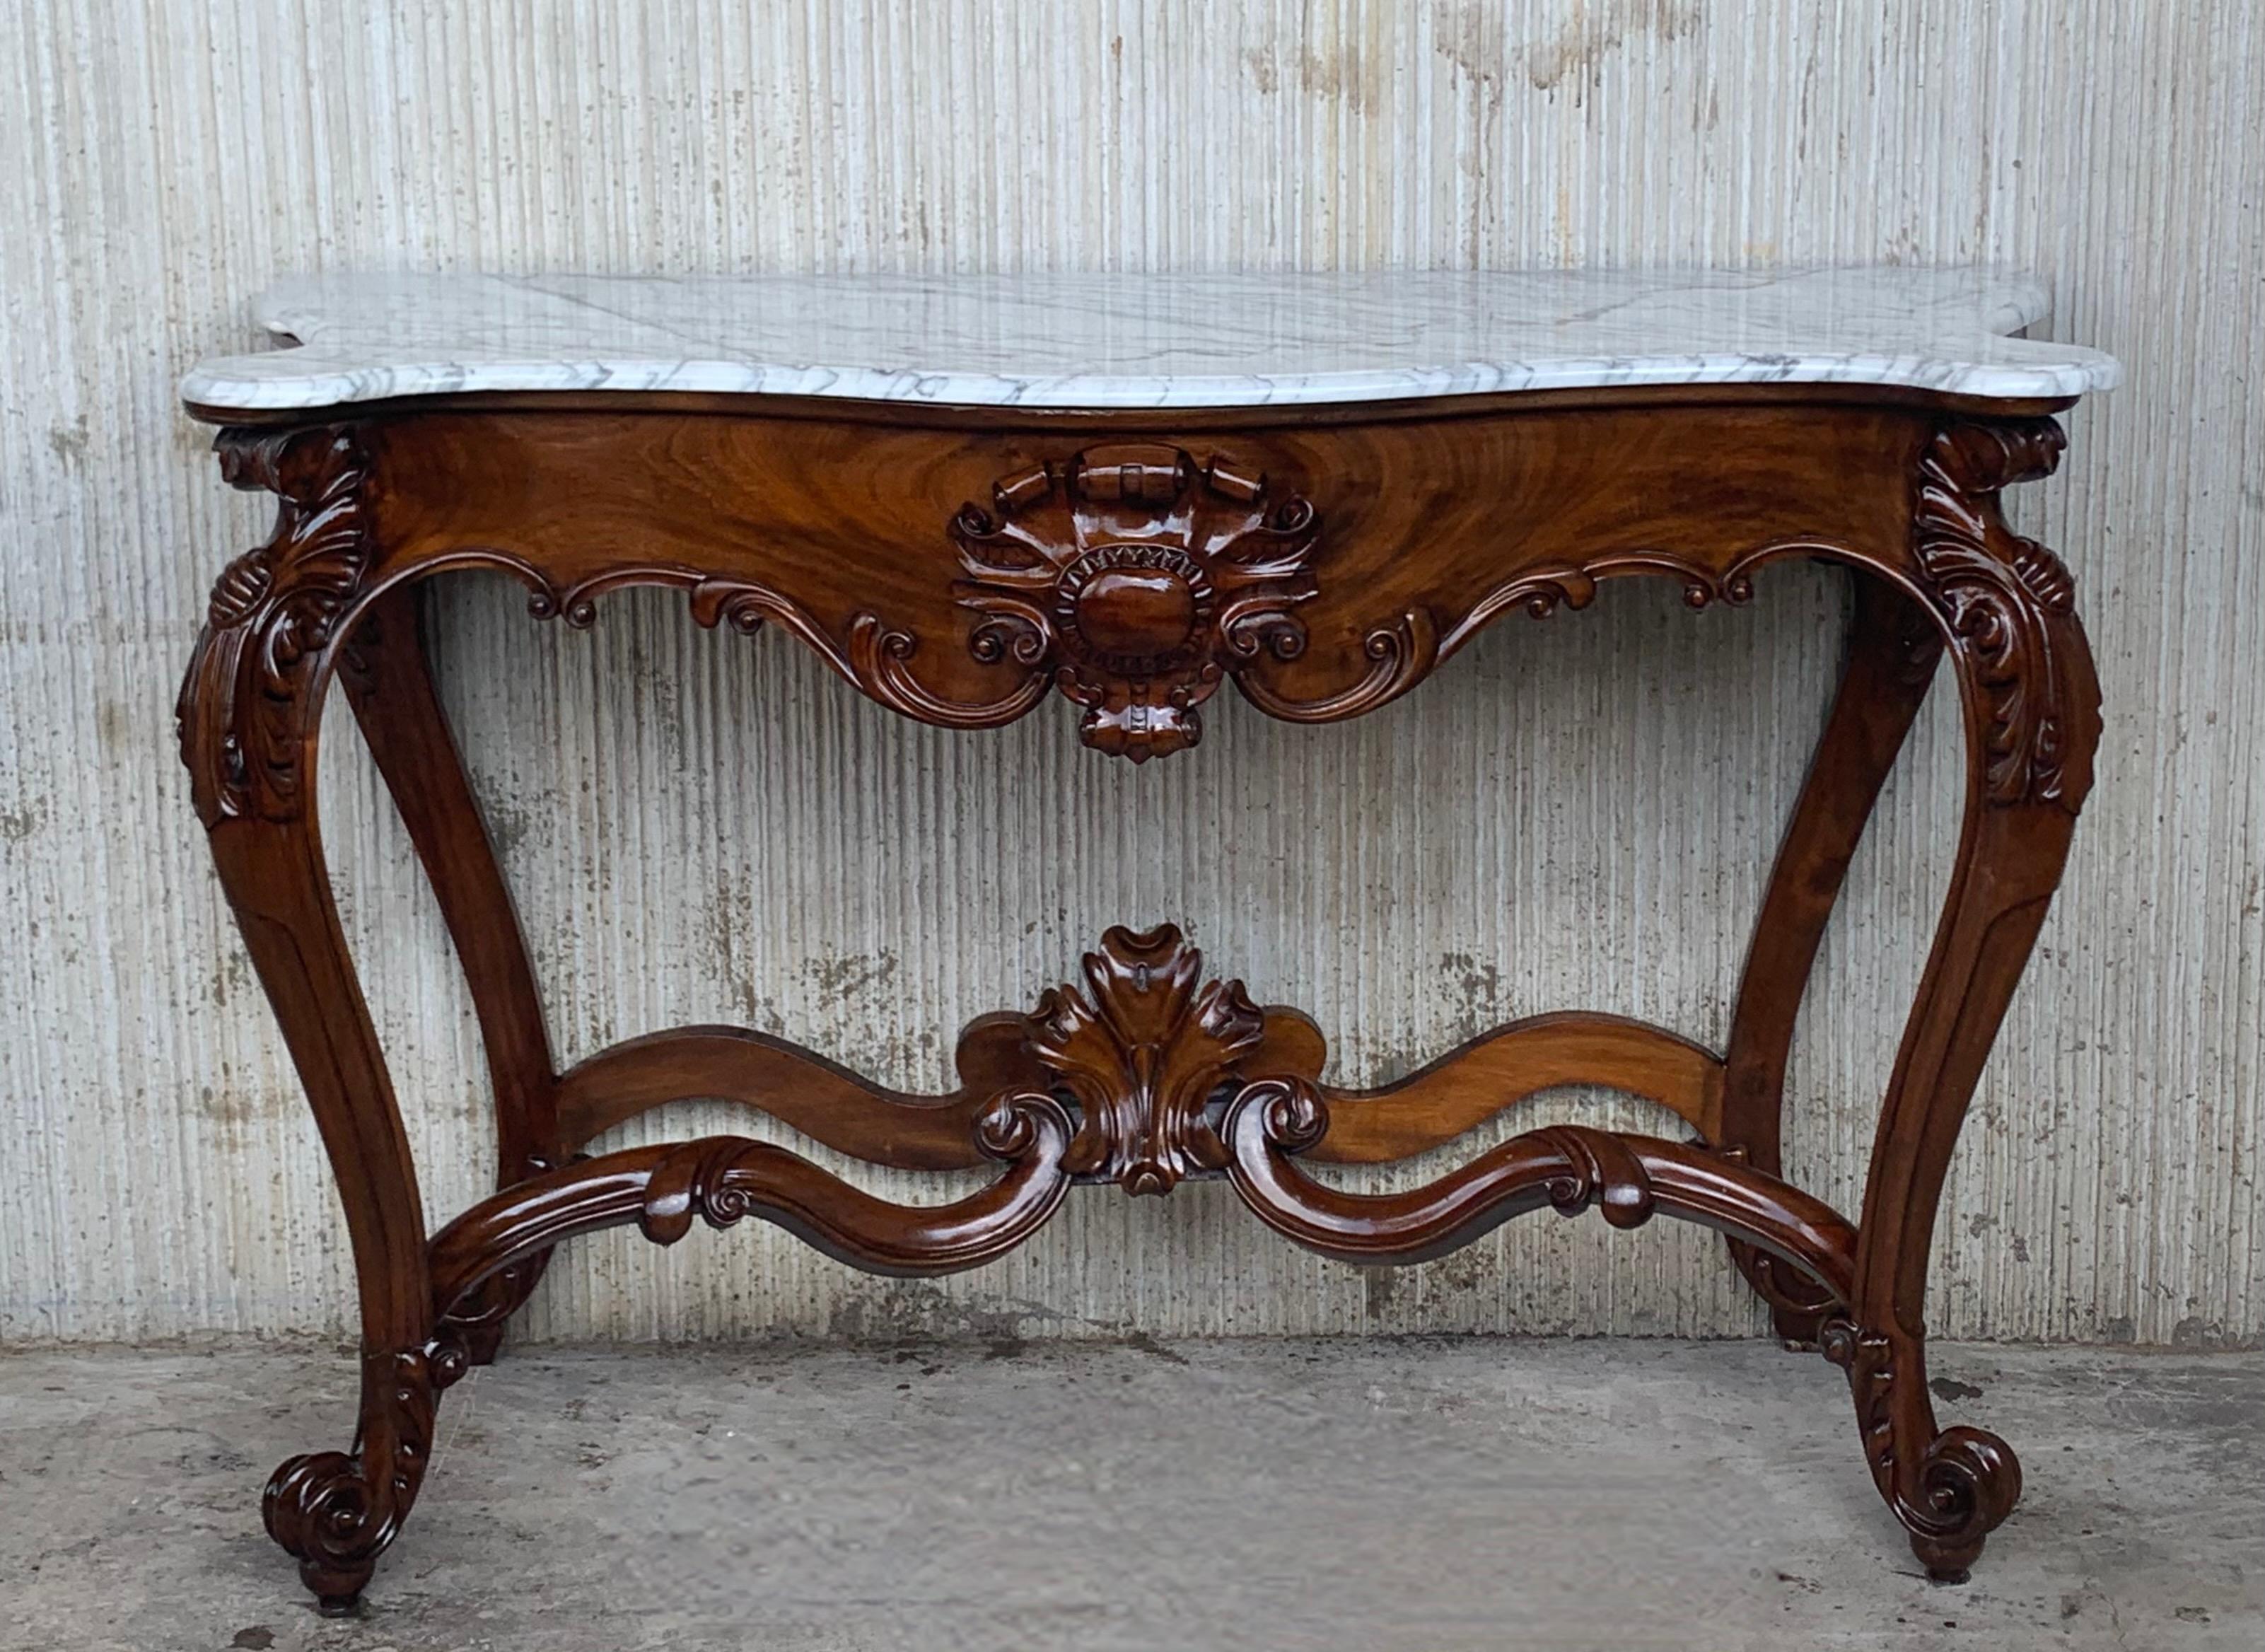  Large French Regency Carved Walnut Console Table with White Marble Top 13